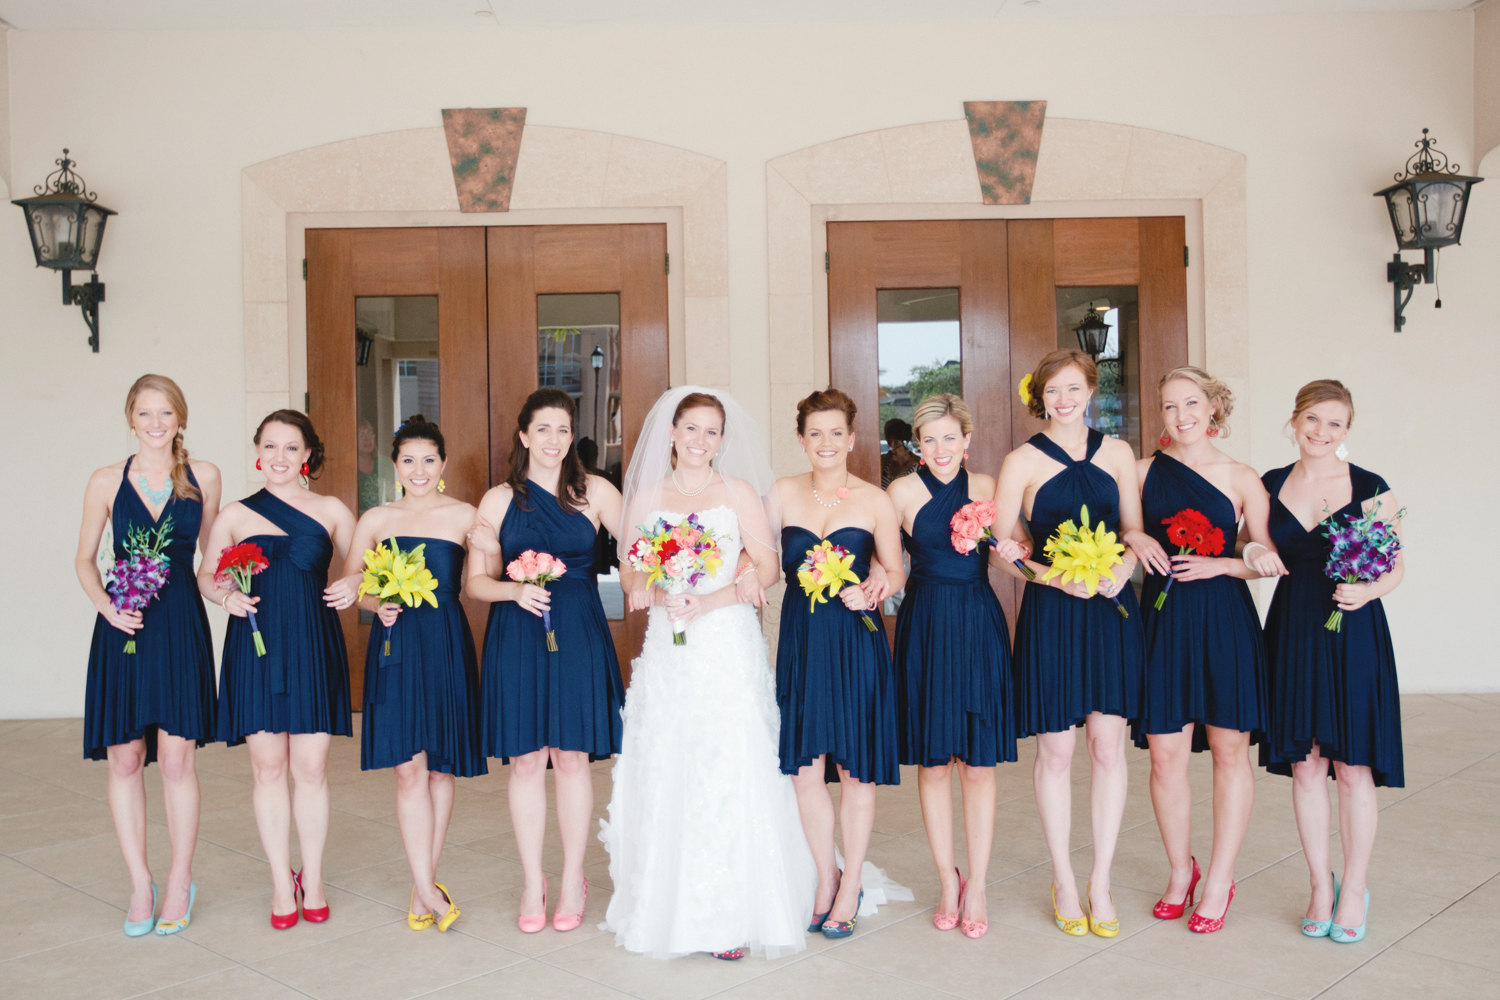 navy blue bridesmaid convertible dresses | via http://emmalinebride.com/bridesmaids/bridesmaid-dress-worn-different-ways/ | love the shoes!